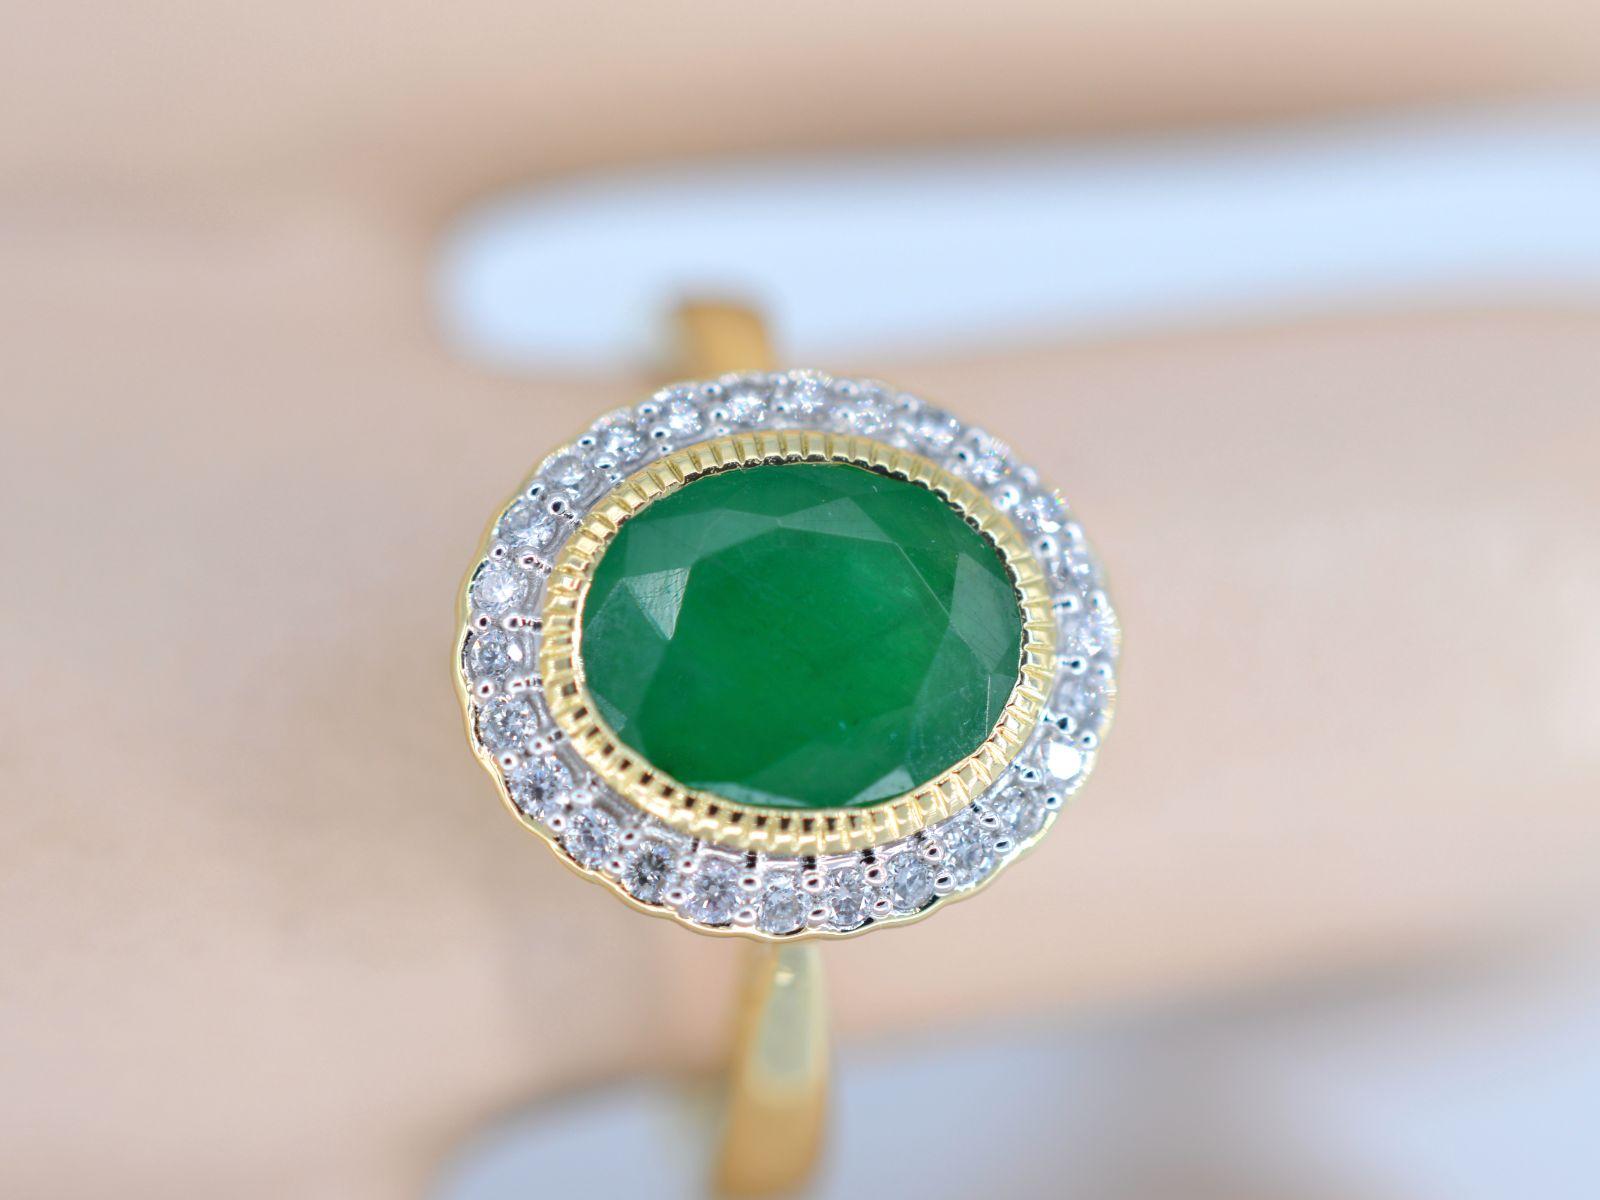 

Diamonds
Weight: 0.15 carat
Cut: Brilliant cut
Colour: F-G
Purity: SI-P
Quality: Very good

Gemstone: Emerald
Cut: Oval cut
Weight: 2.00 carats

Jewel: Ring
Weight: 4.0 grams
Hallmark: 14 karat 
Ring size: 54 (17.25 mm)
Condition: New

Retail